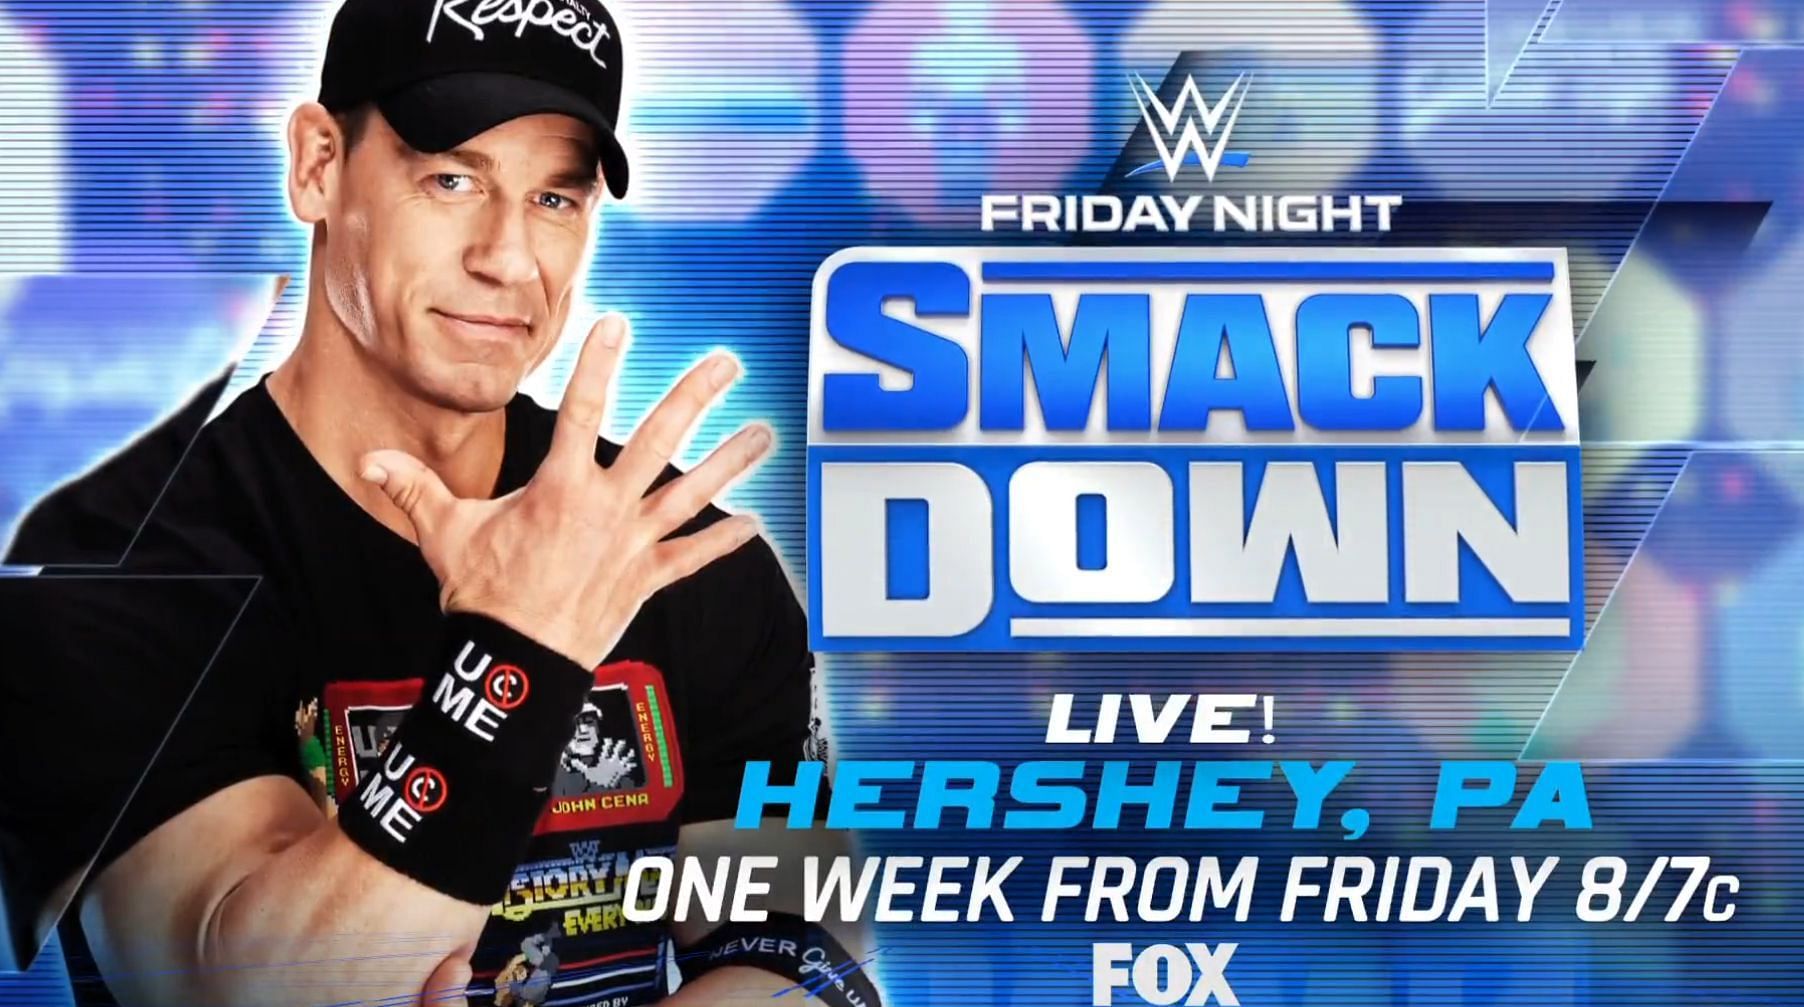 What surprises are in store when John Cena returns to SmackDown??